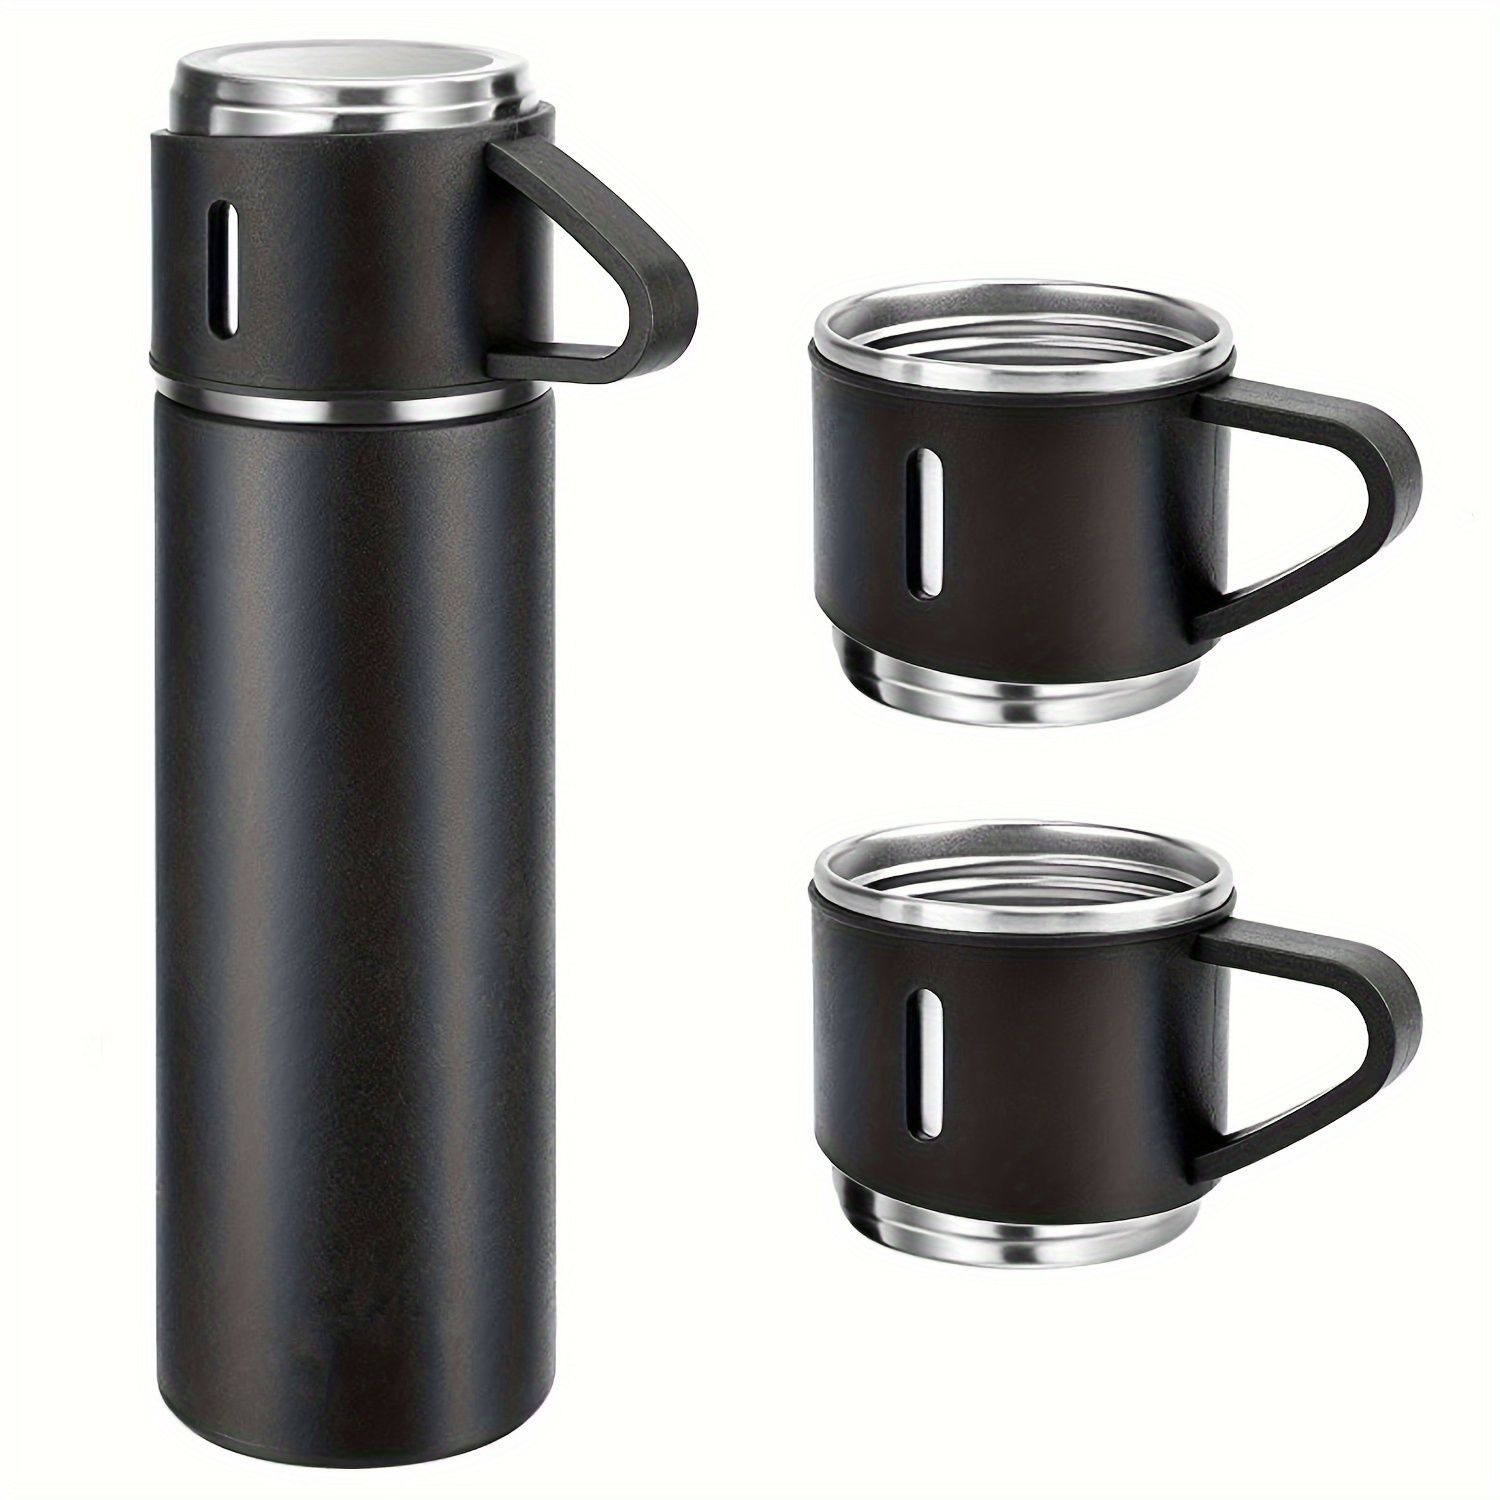 

Stainless Steel Vacuum Set - 500ml/16.9oz Insulated Thermal Mug For Hot And Cold Drinks, Ideal For Business And Interior Decoration